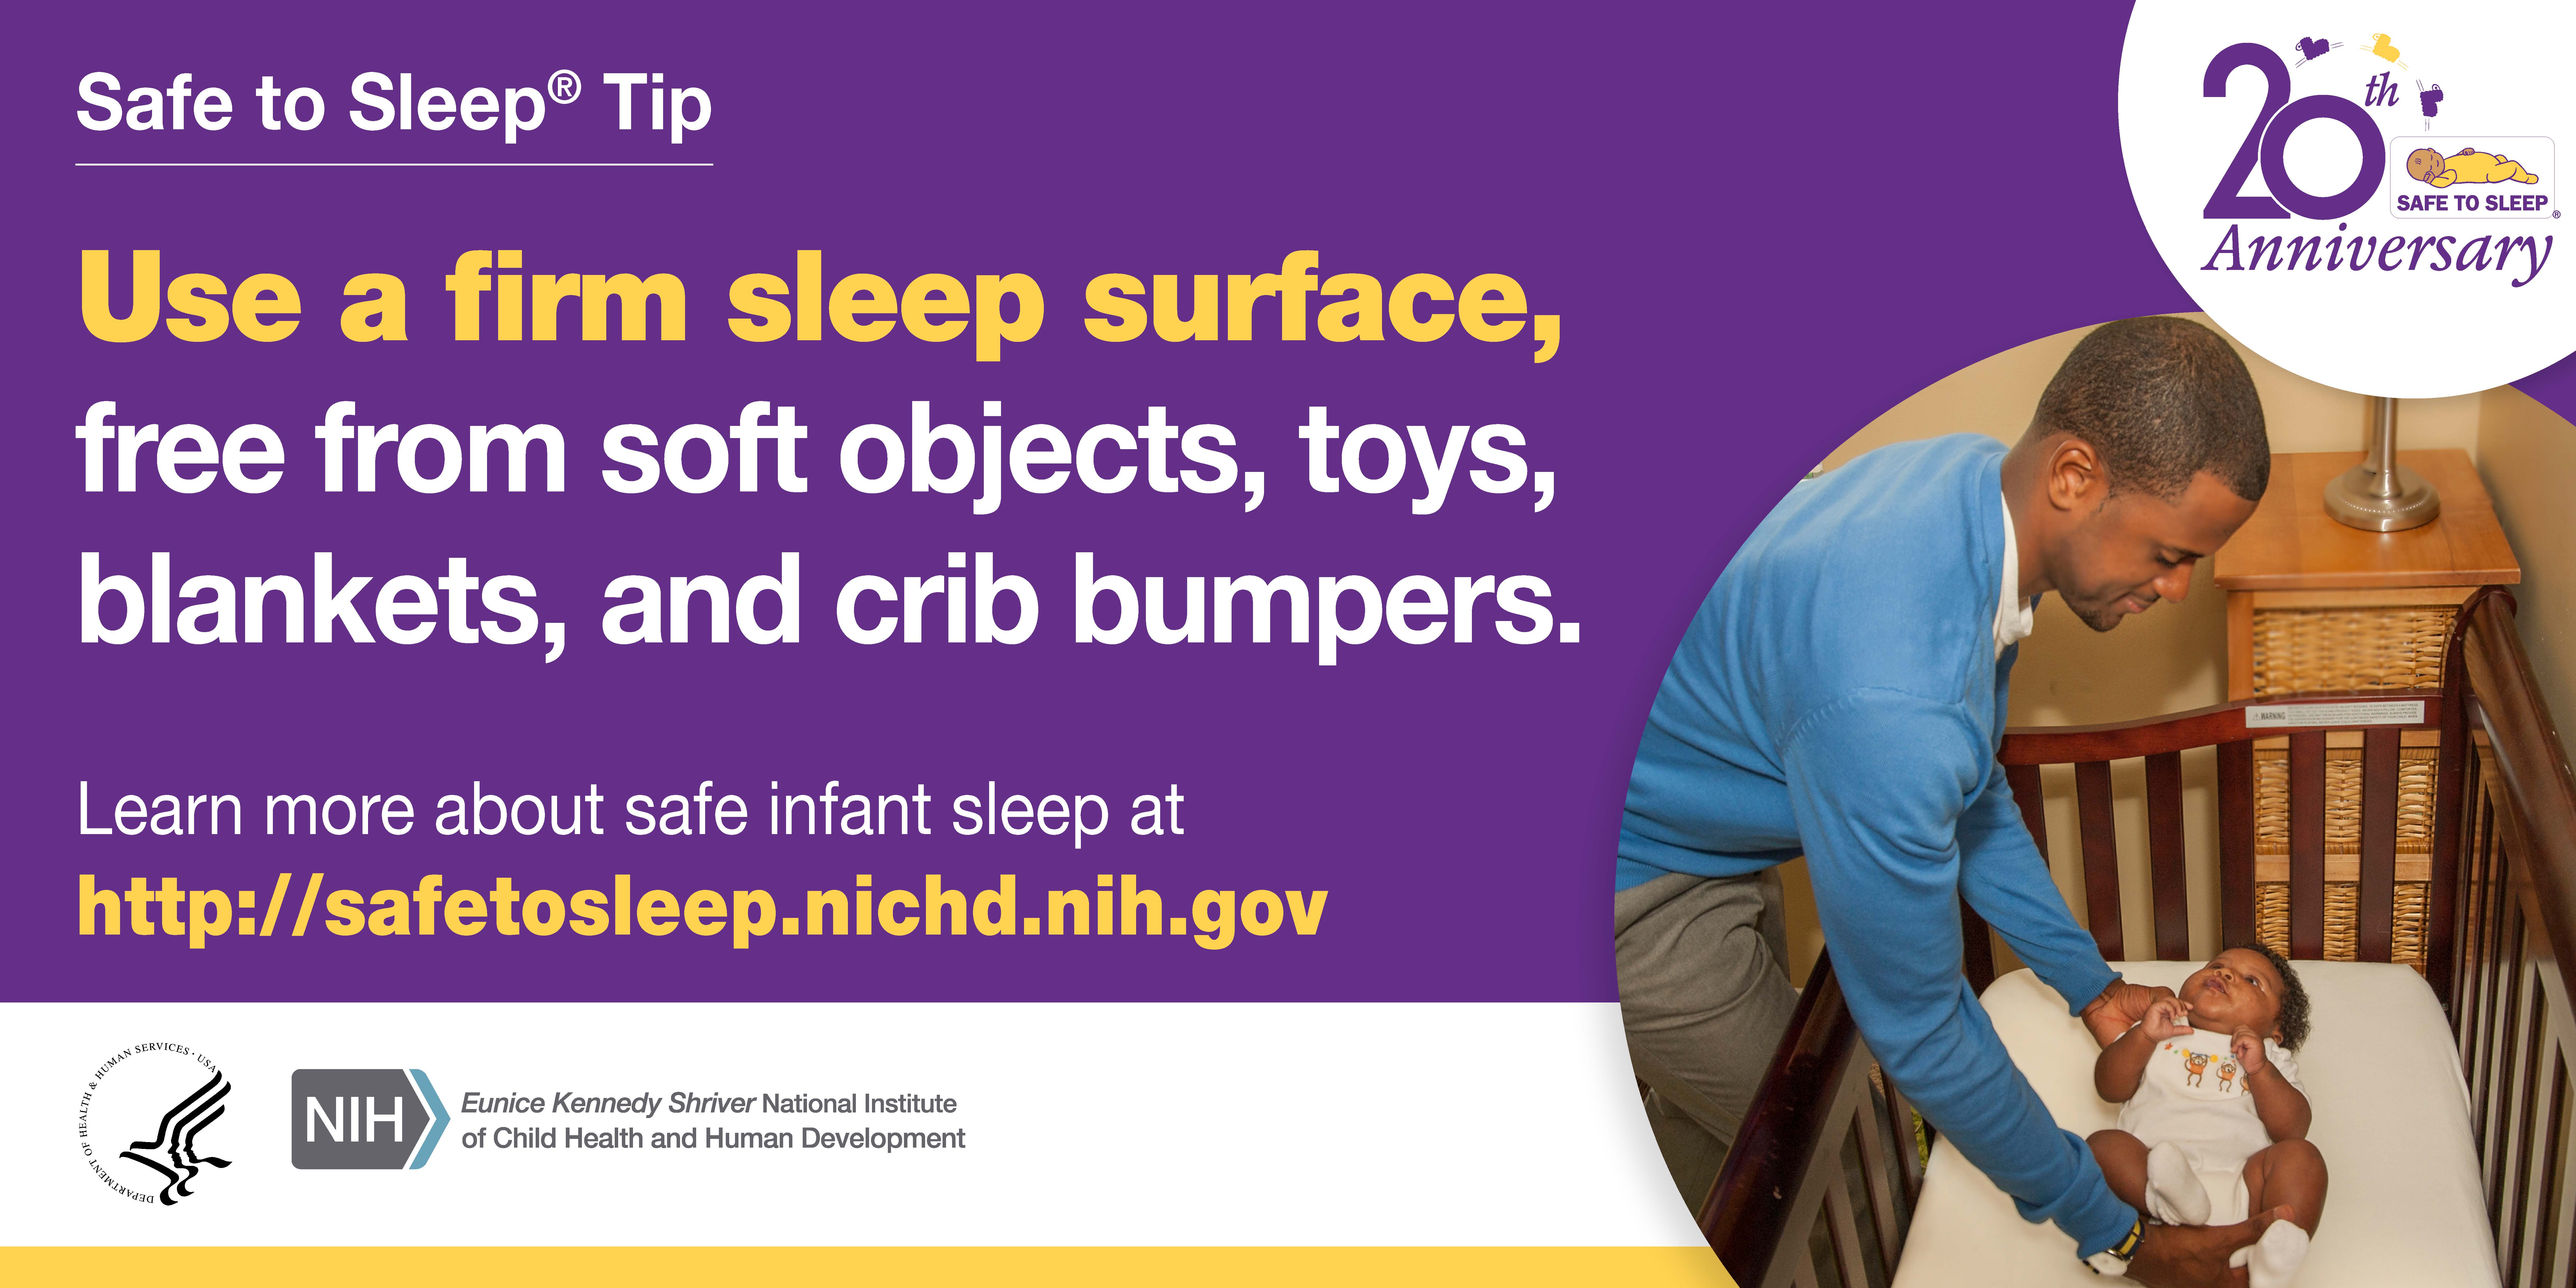 Use firm sleep surface, free from soft objects, toys, blankets, and crib bumpers.